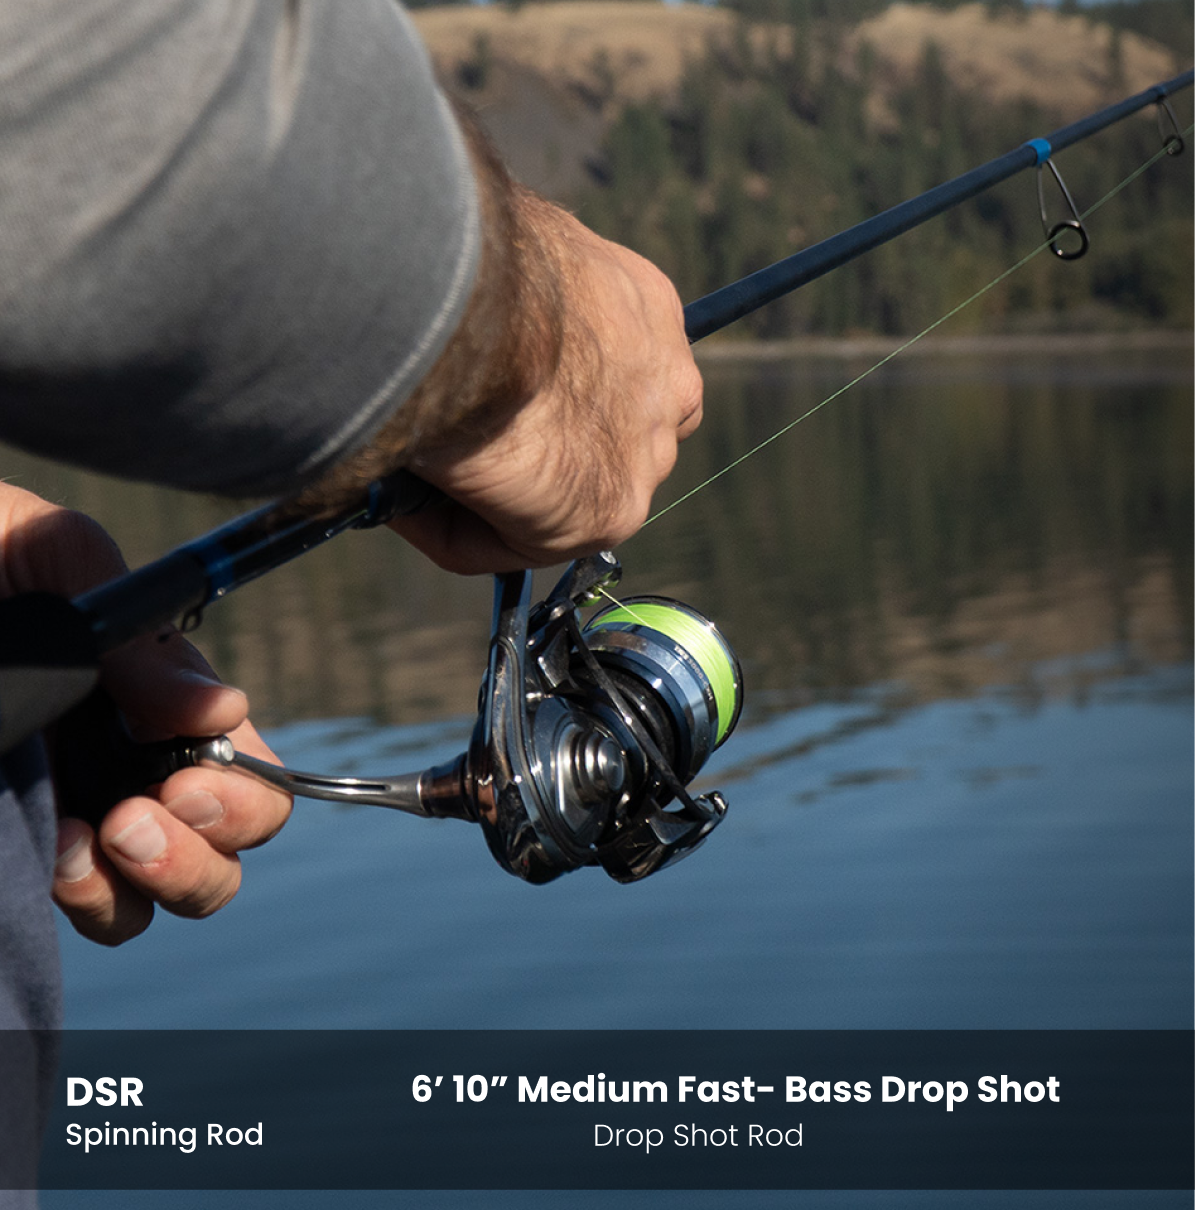 How to Catch Bass With a Spinning Rod